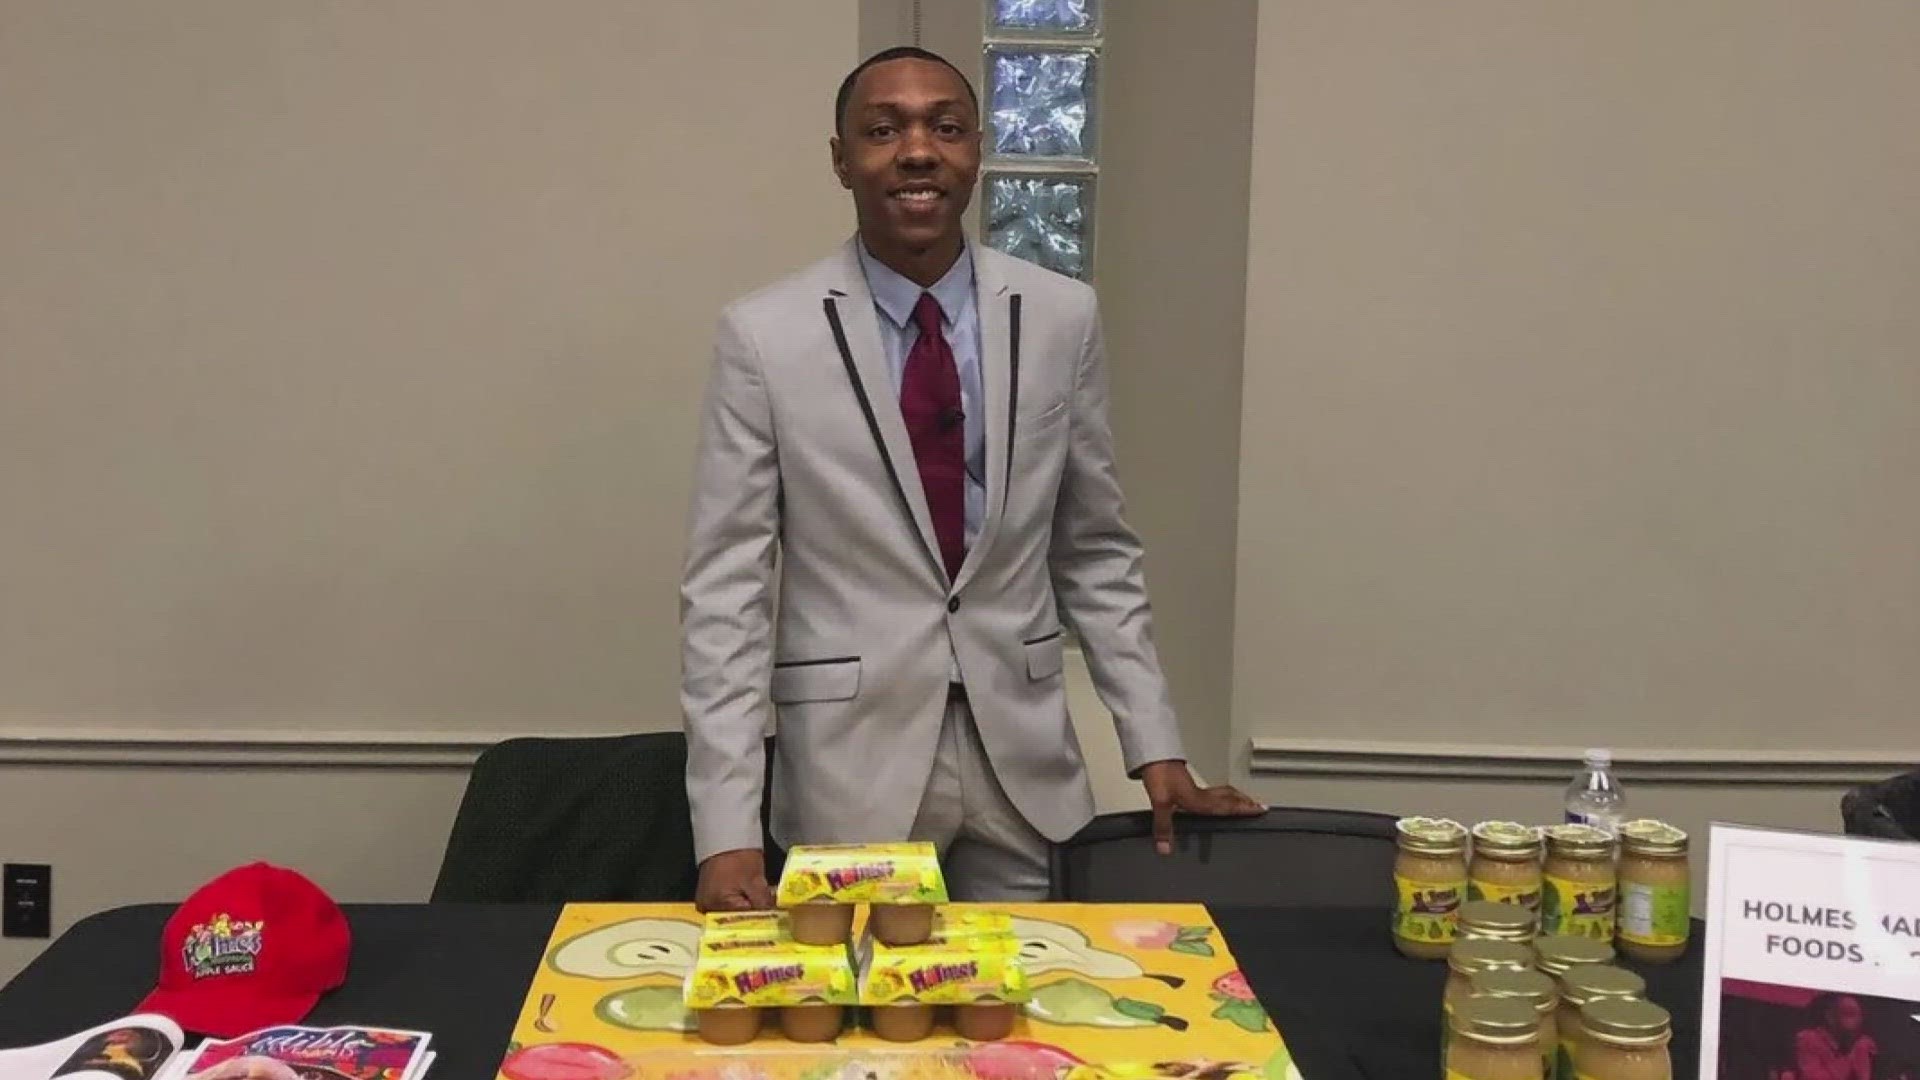 Shaker Heights native Ethan Holmes created Holmes Mouthwatering Applesauce at just age 15.